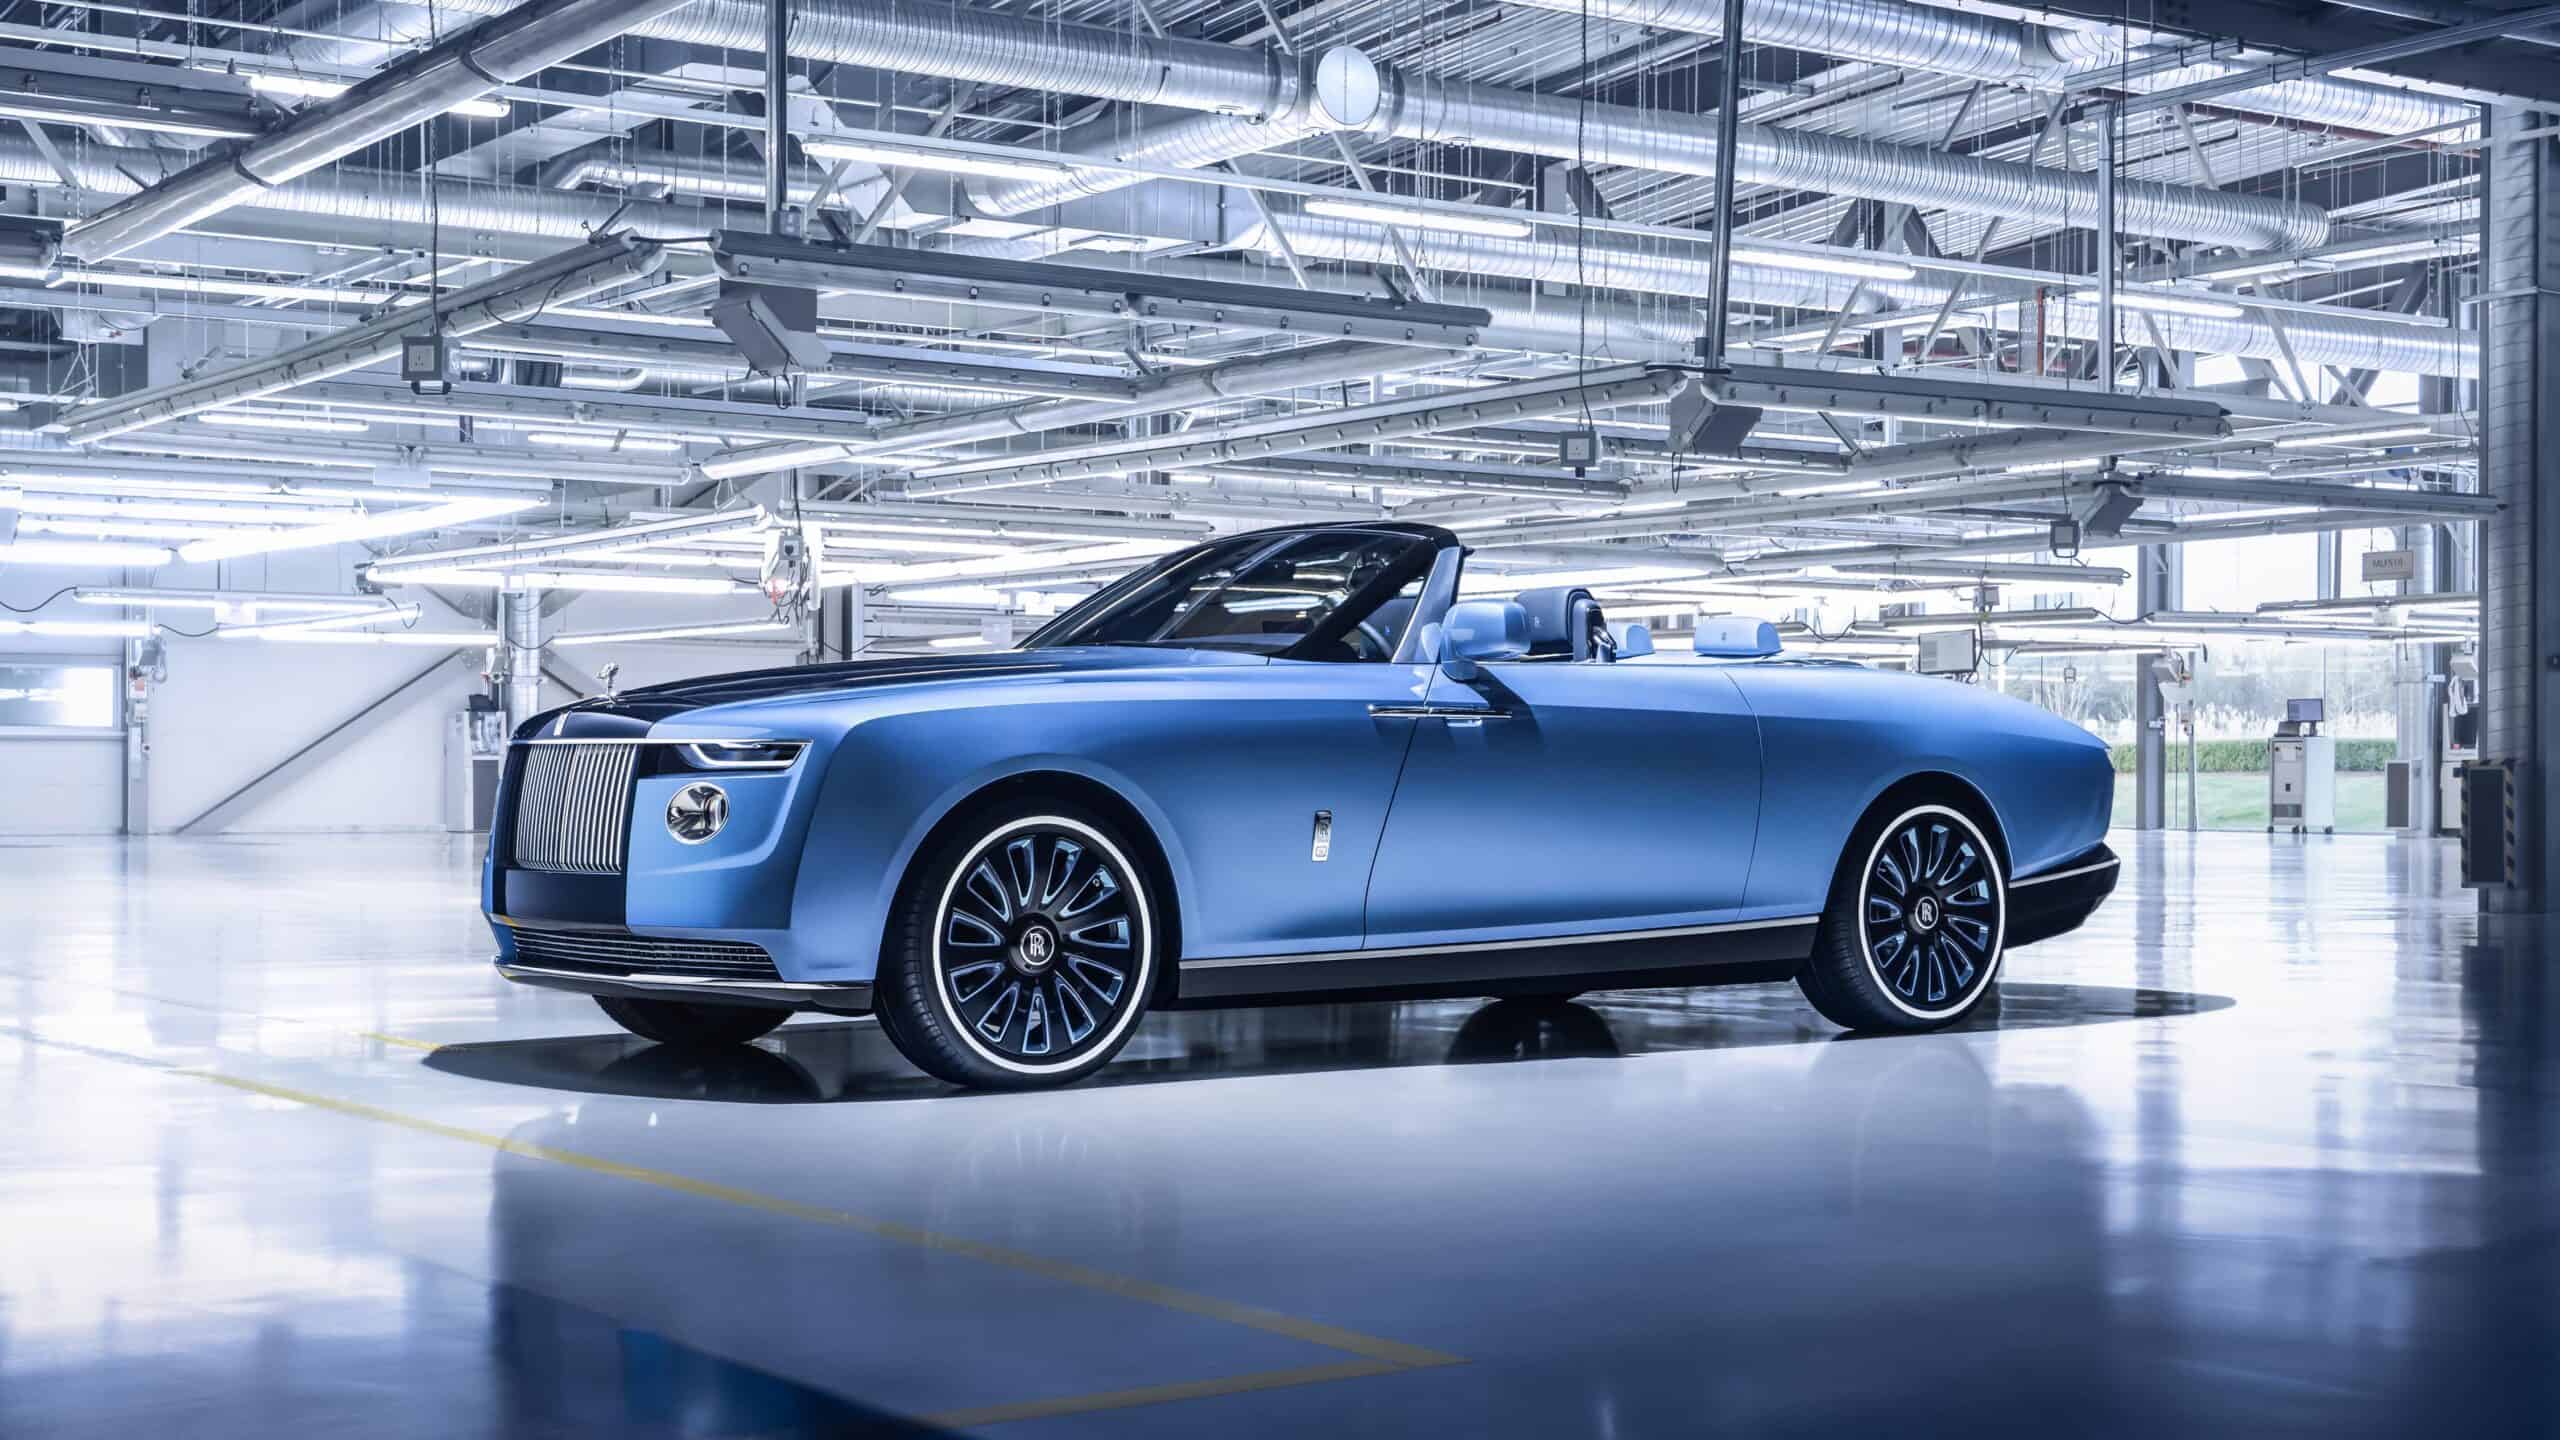 Rolls-Royce ‘Boat Tail’ a Counterpoint to Industrialised Luxury